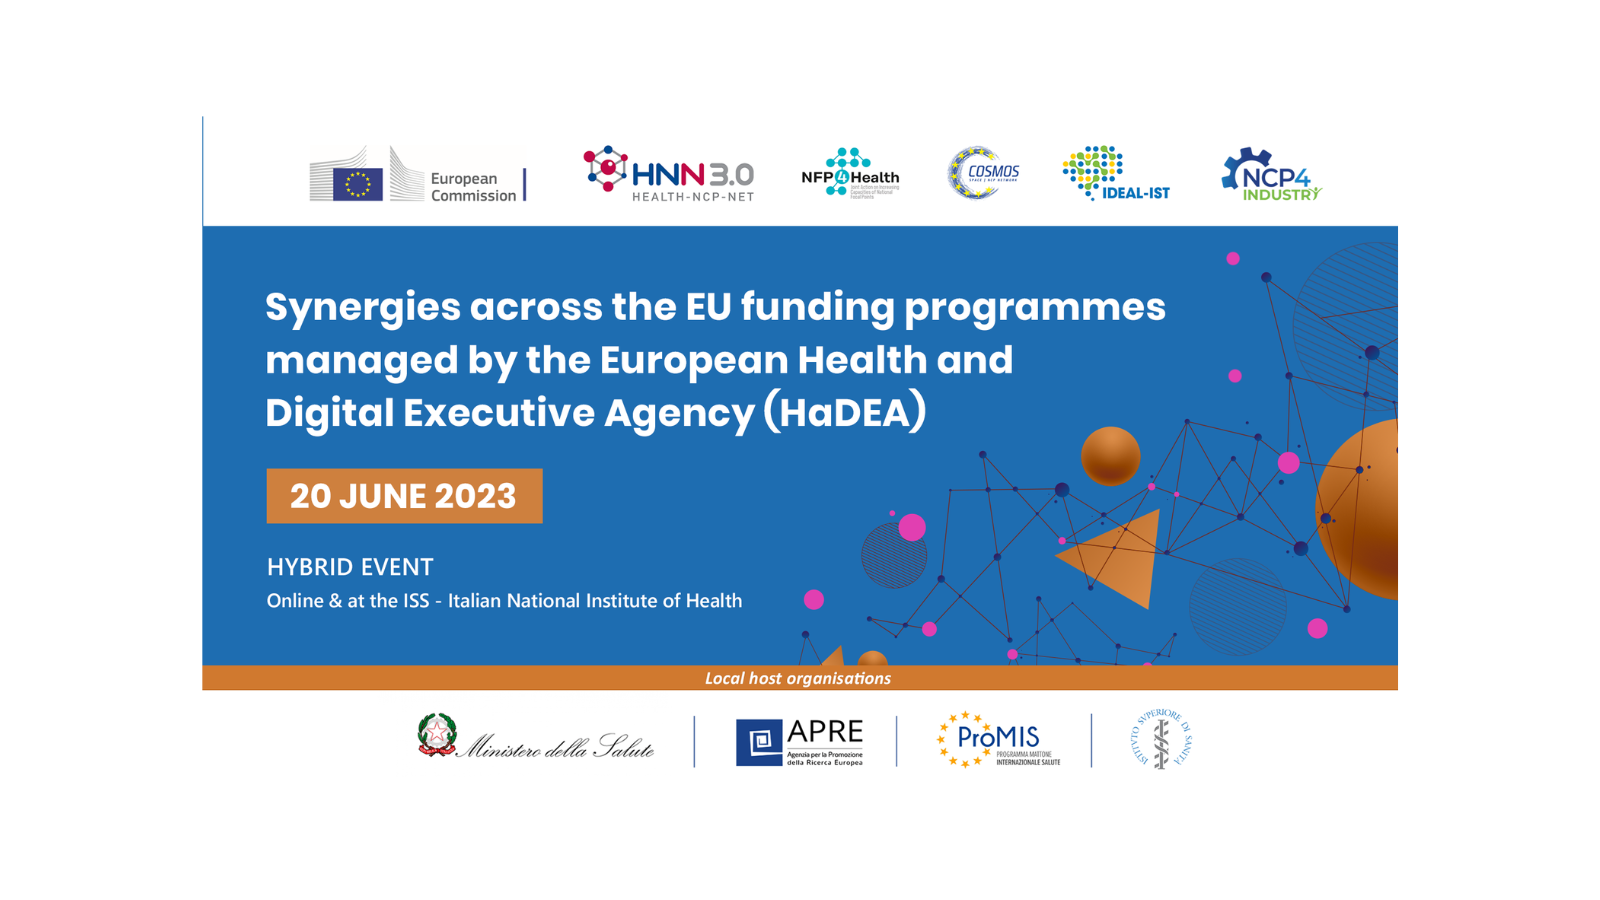 Synergies across the EU funding programmes managed by the European Health and Digital Executive Agency (HaDEA)